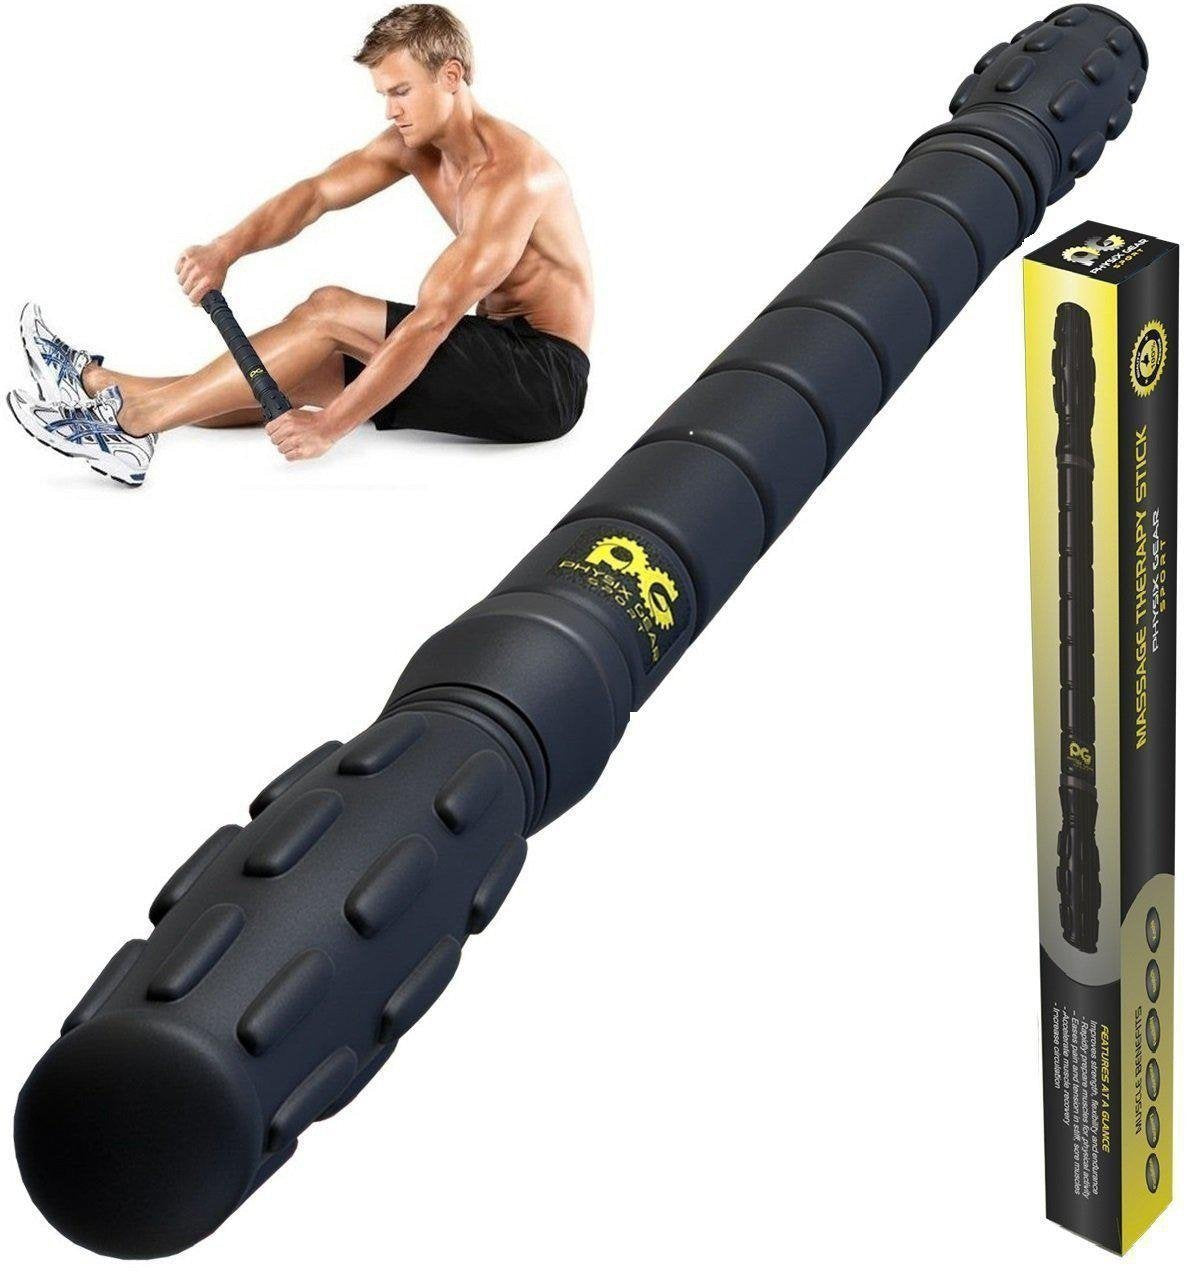 Reduce soreness and pain of muscles with the best massage roller stick-Physix Gear Sport